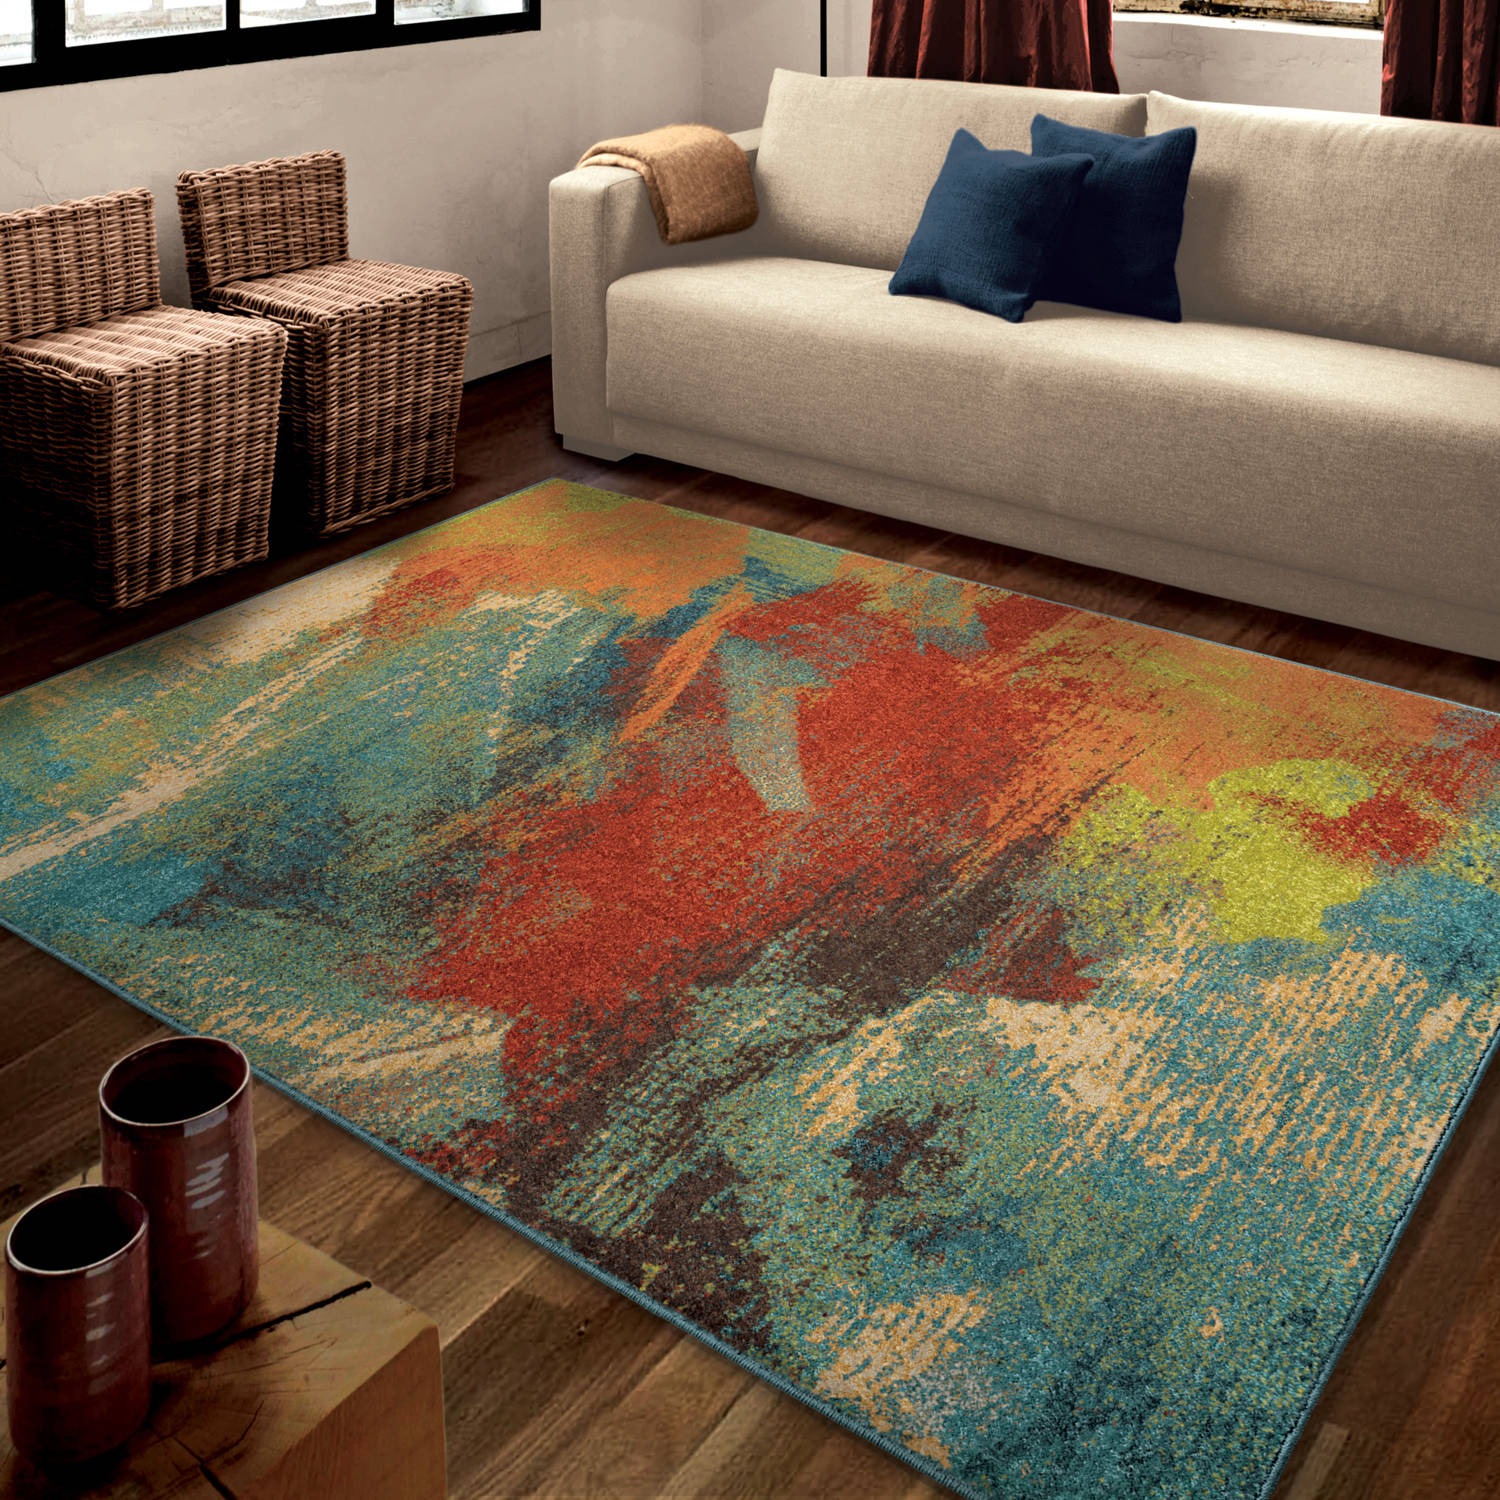 Contemporary affordable rugs affordable rugs art ULENLKE